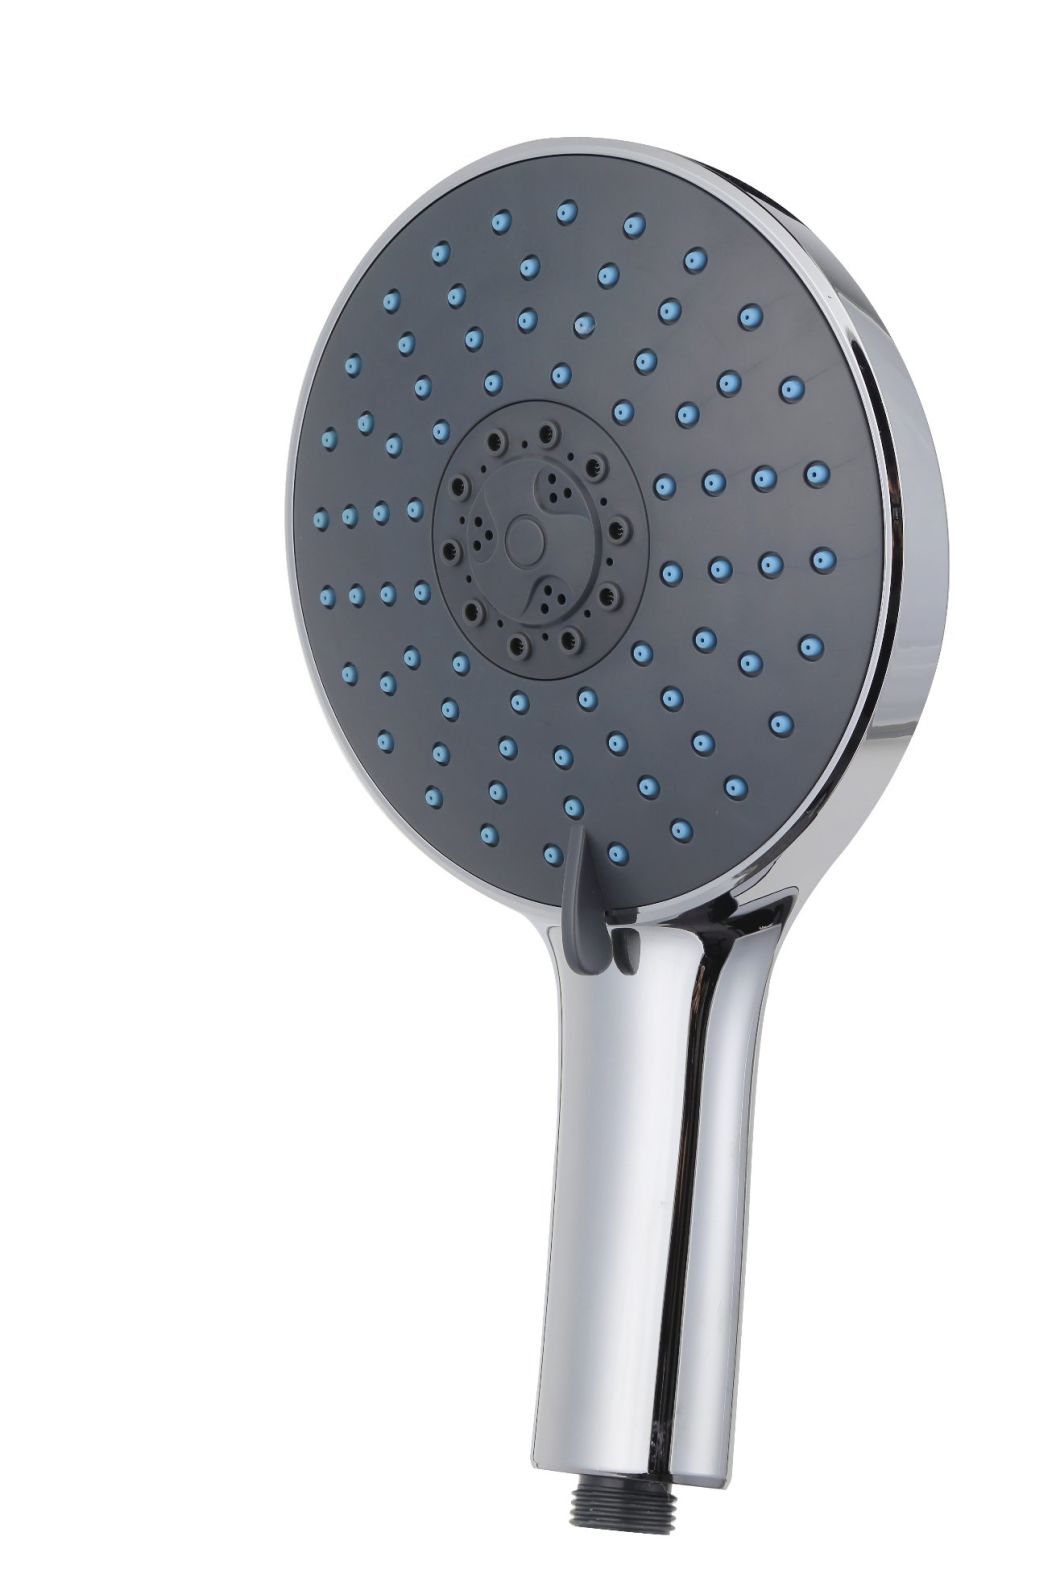 Hot Sell Hand Held Shower Head Made in China Lm-3018gh